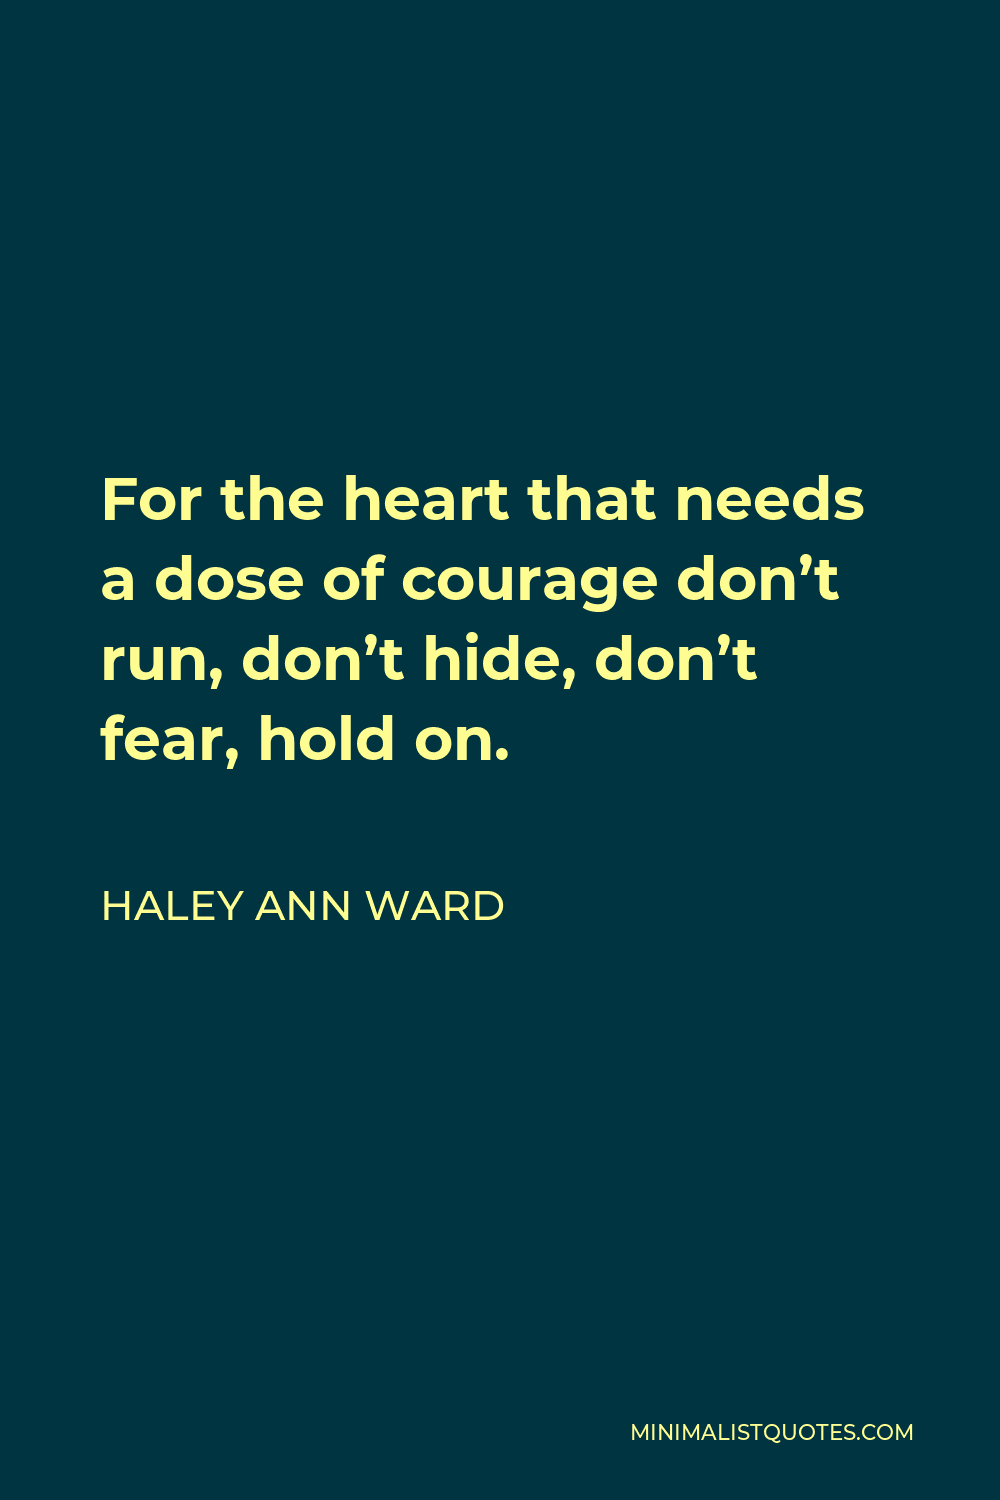 Haley Ann Ward Quote - For the heart that needs a dose of courage don’t run, don’t hide, don’t fear, hold on.